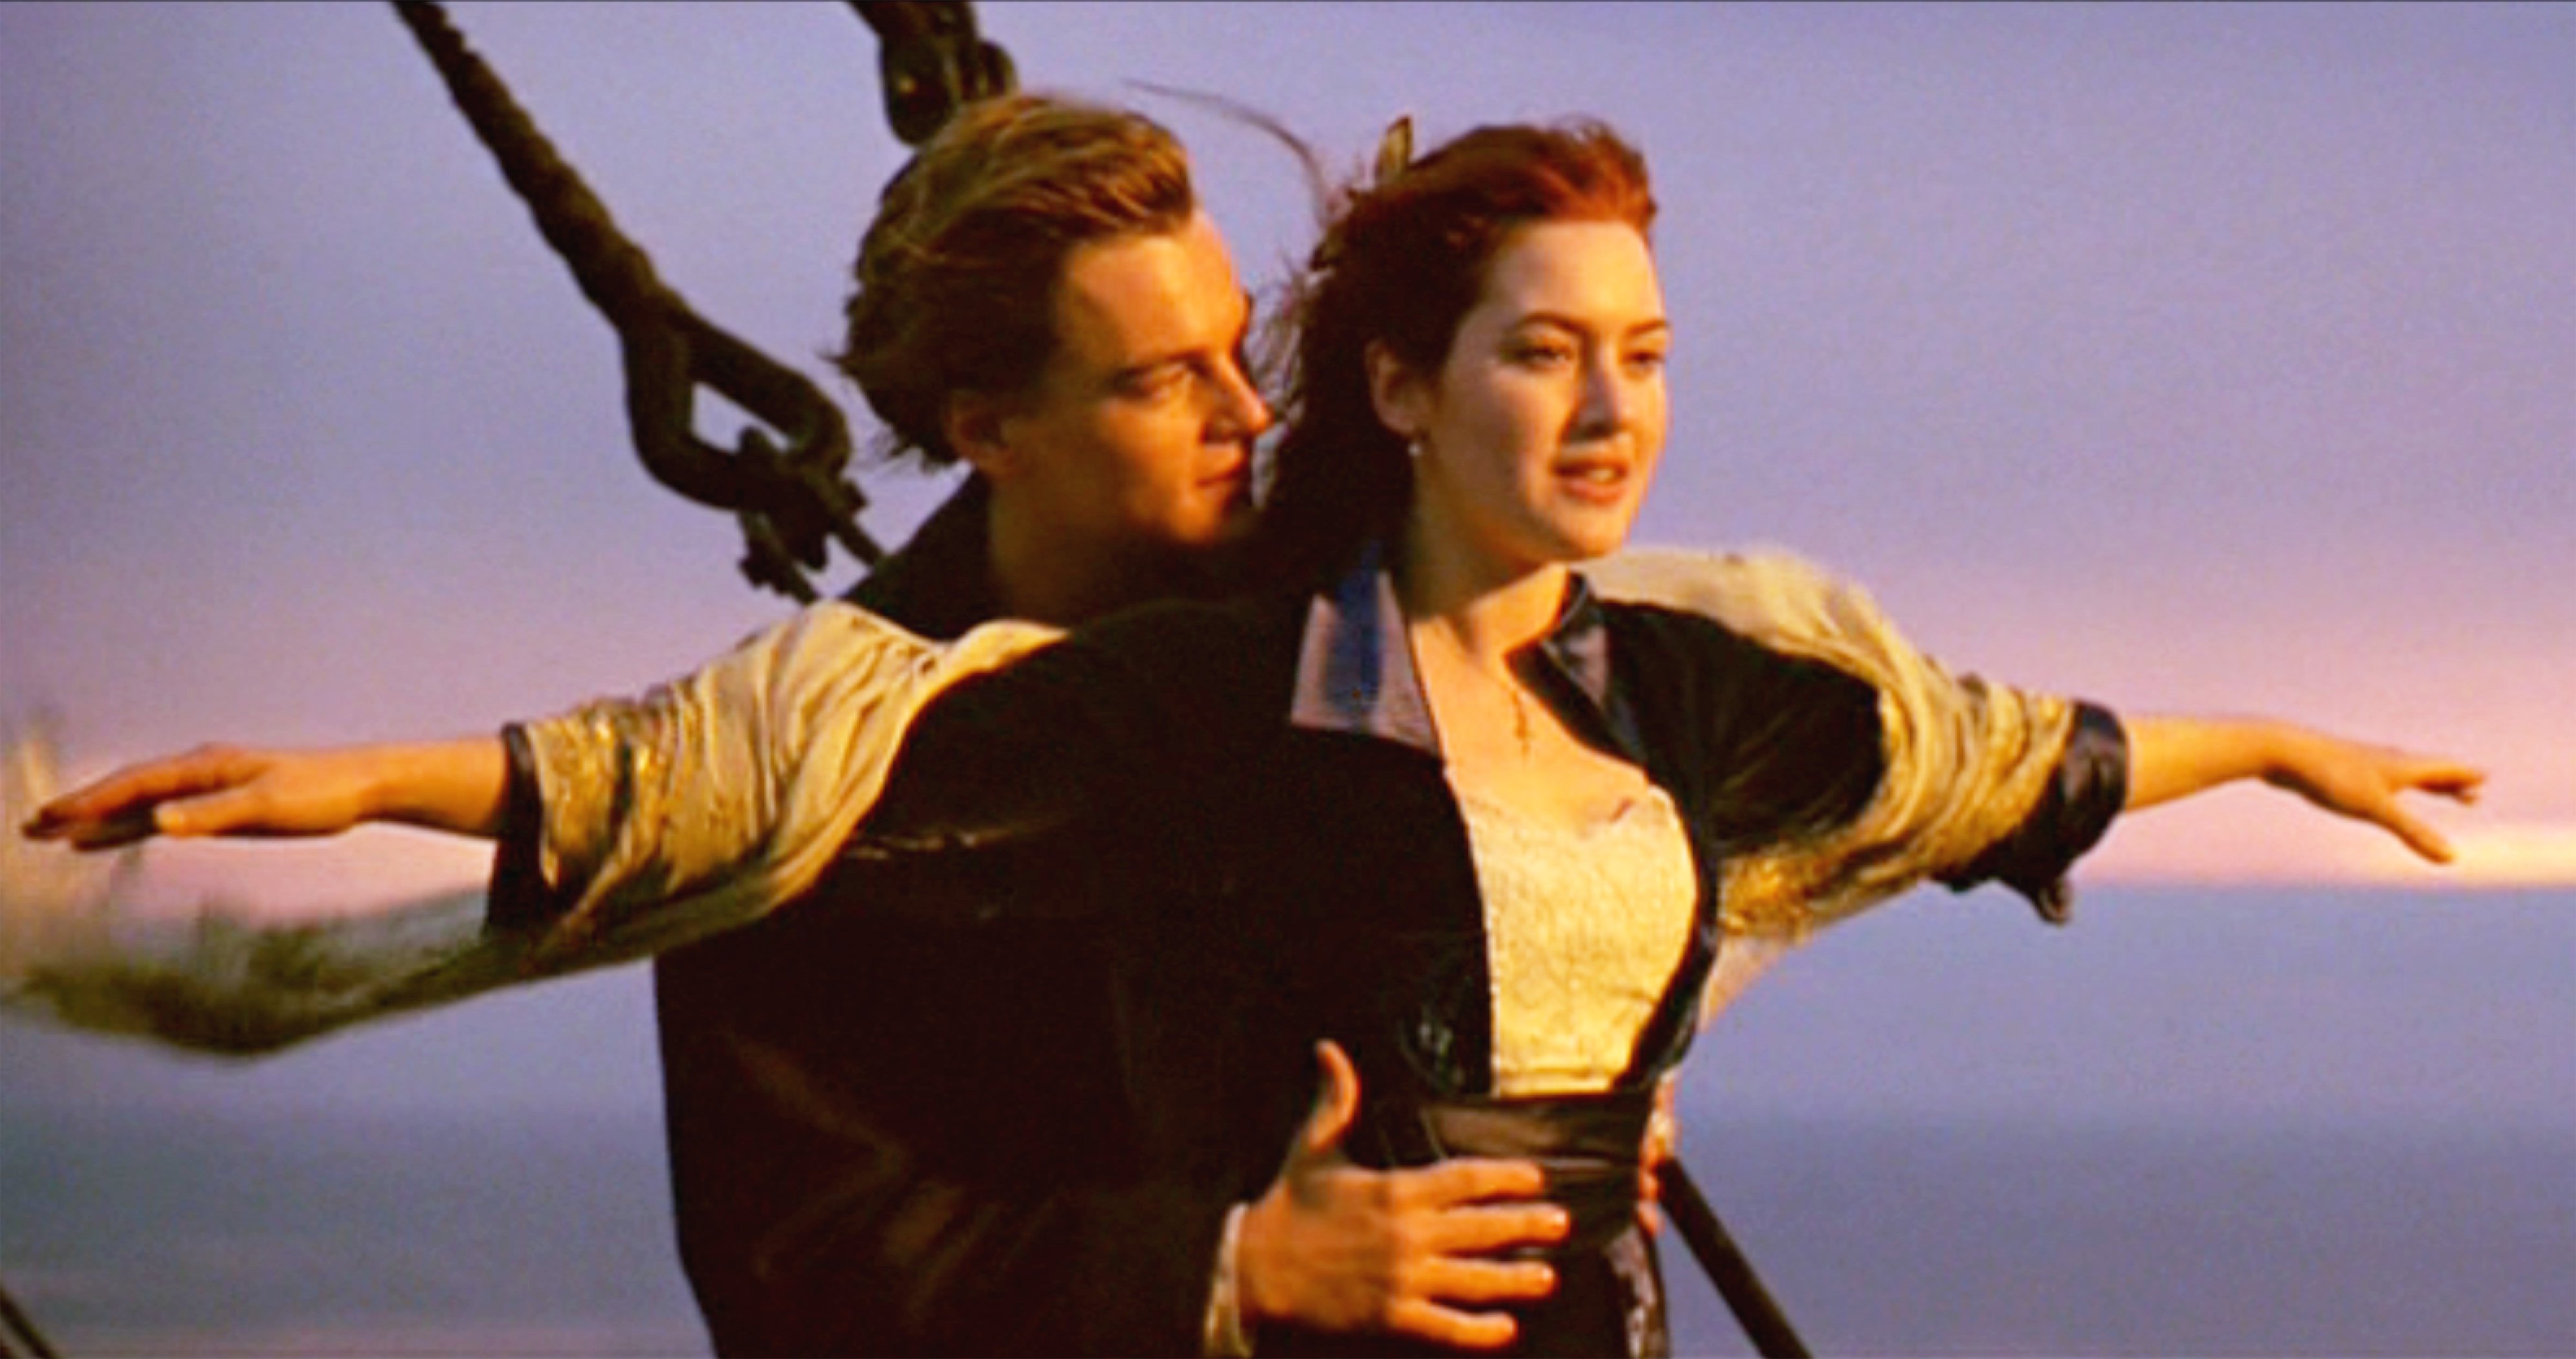 Leonardo DiCaprio as Jack and Kate Winslet as Rose in the movie, "Titanic" on December 19, 1997 in Los Angeles, California ┃Source: Getty Images